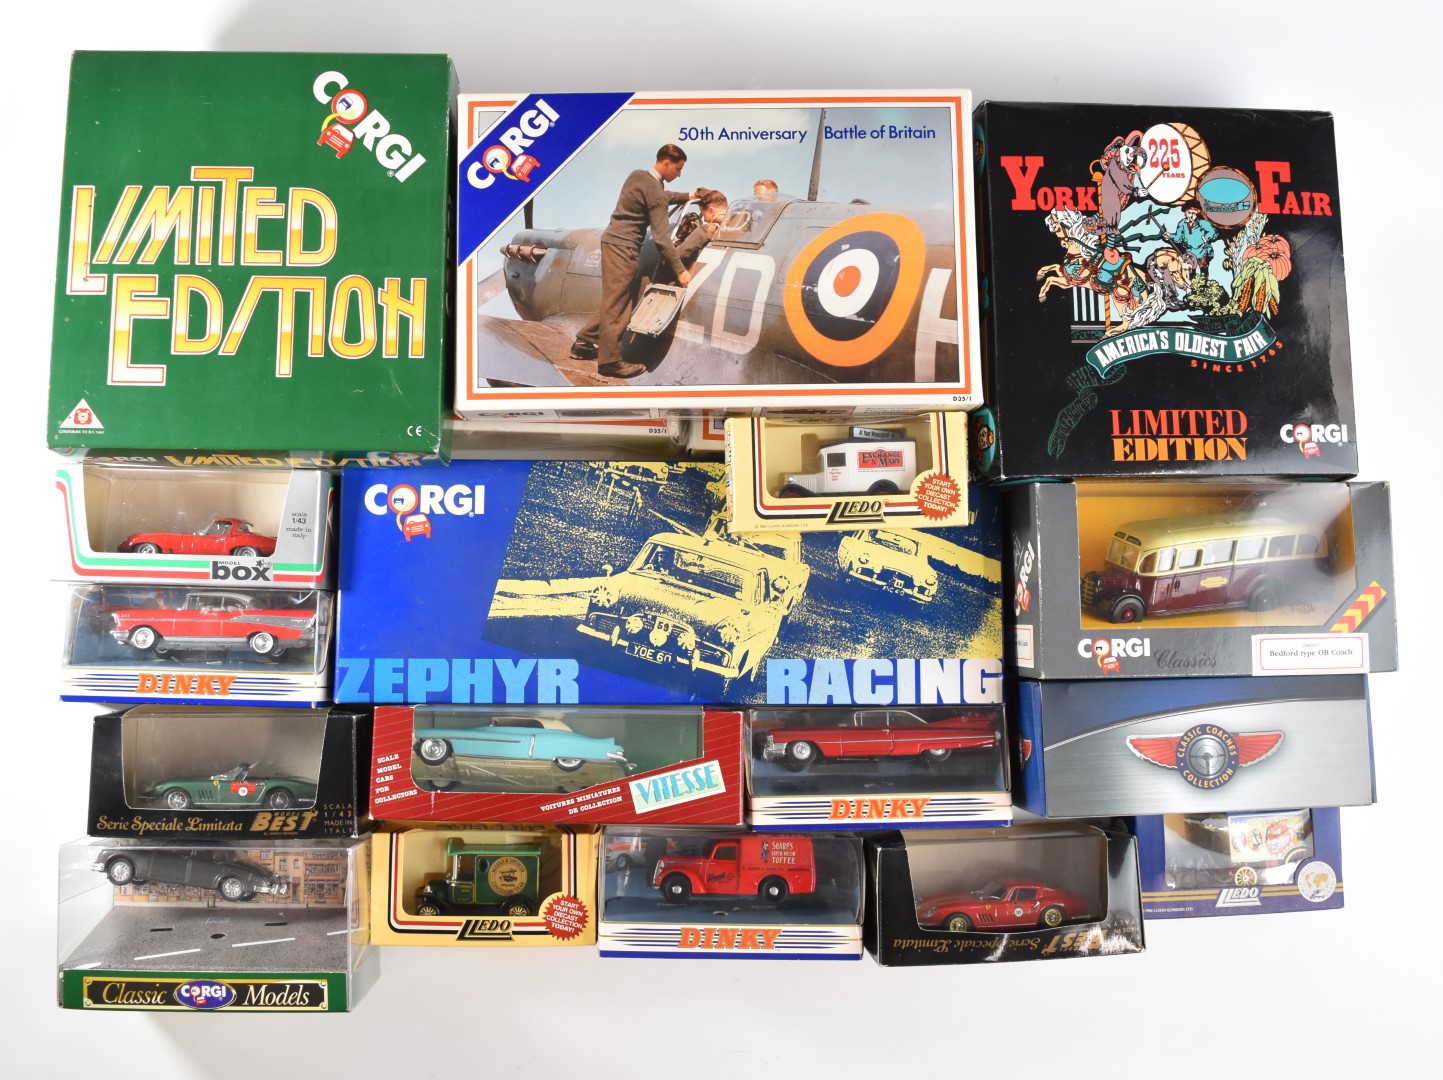 A collection of Corgi, Dinky and similar diecast model vehicles to include 50th Anniversary Battle